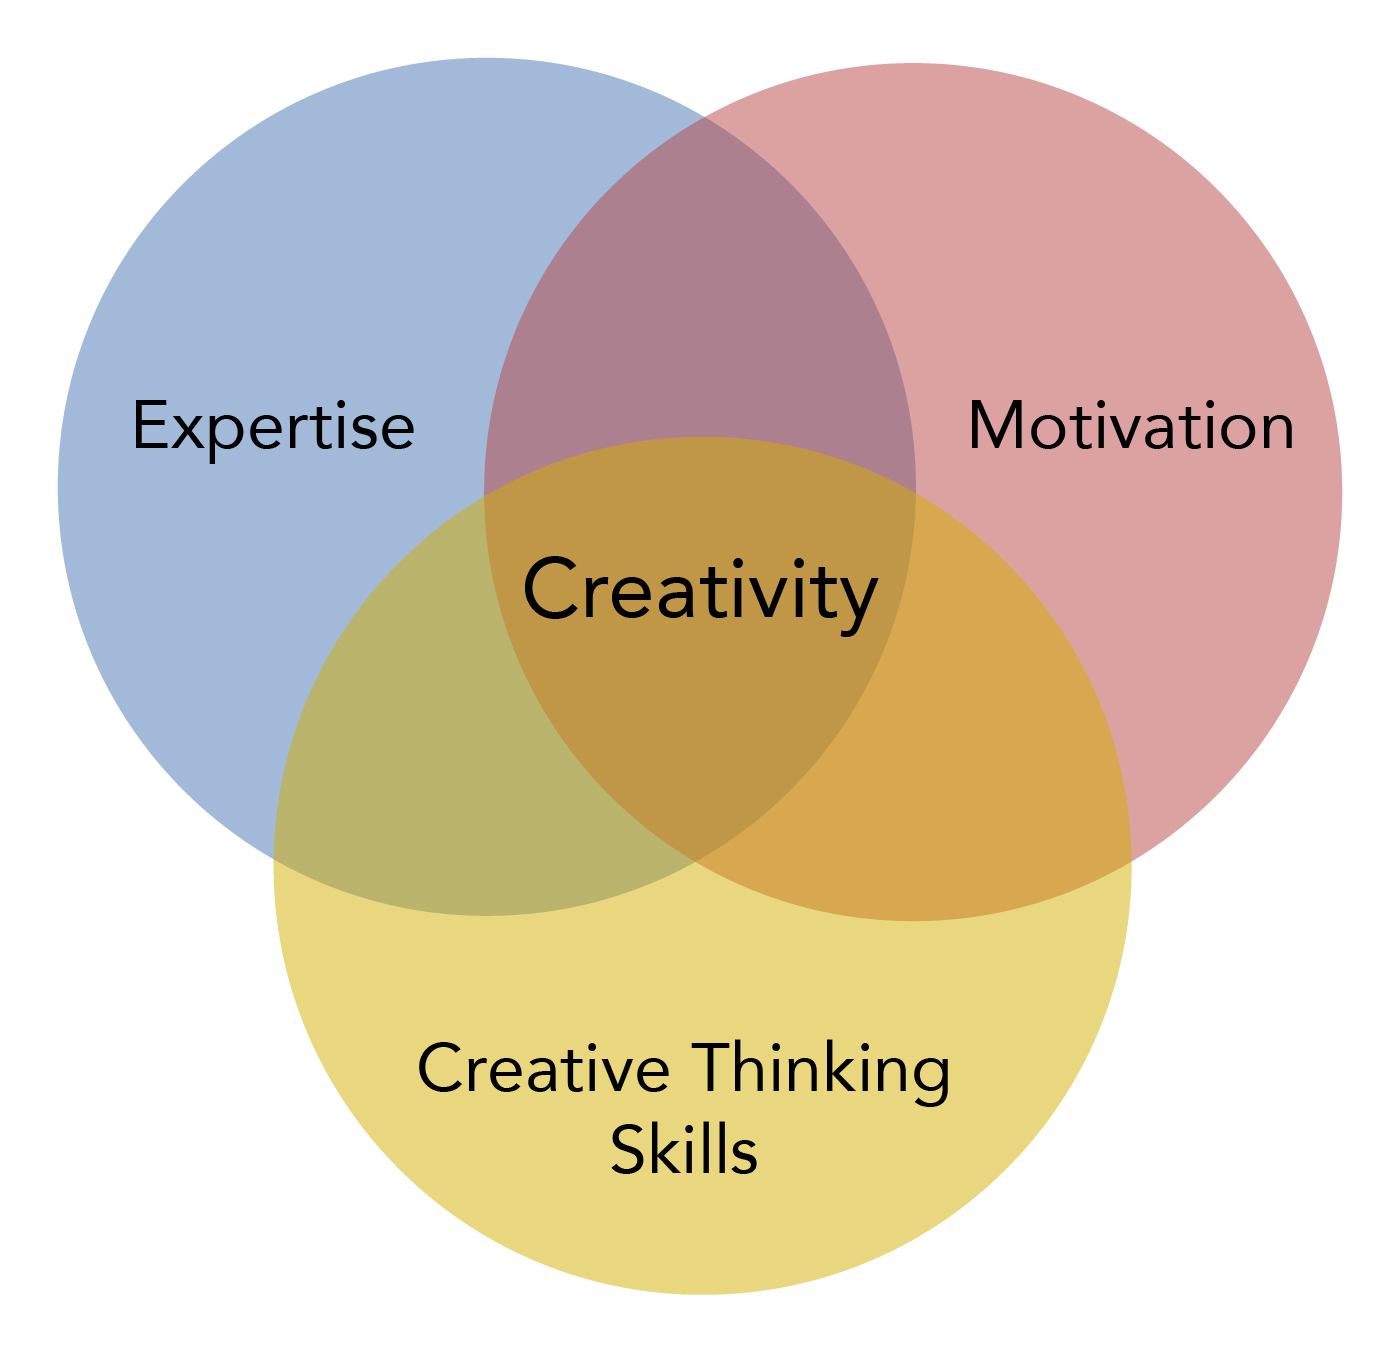 How can creative thinking be improved?